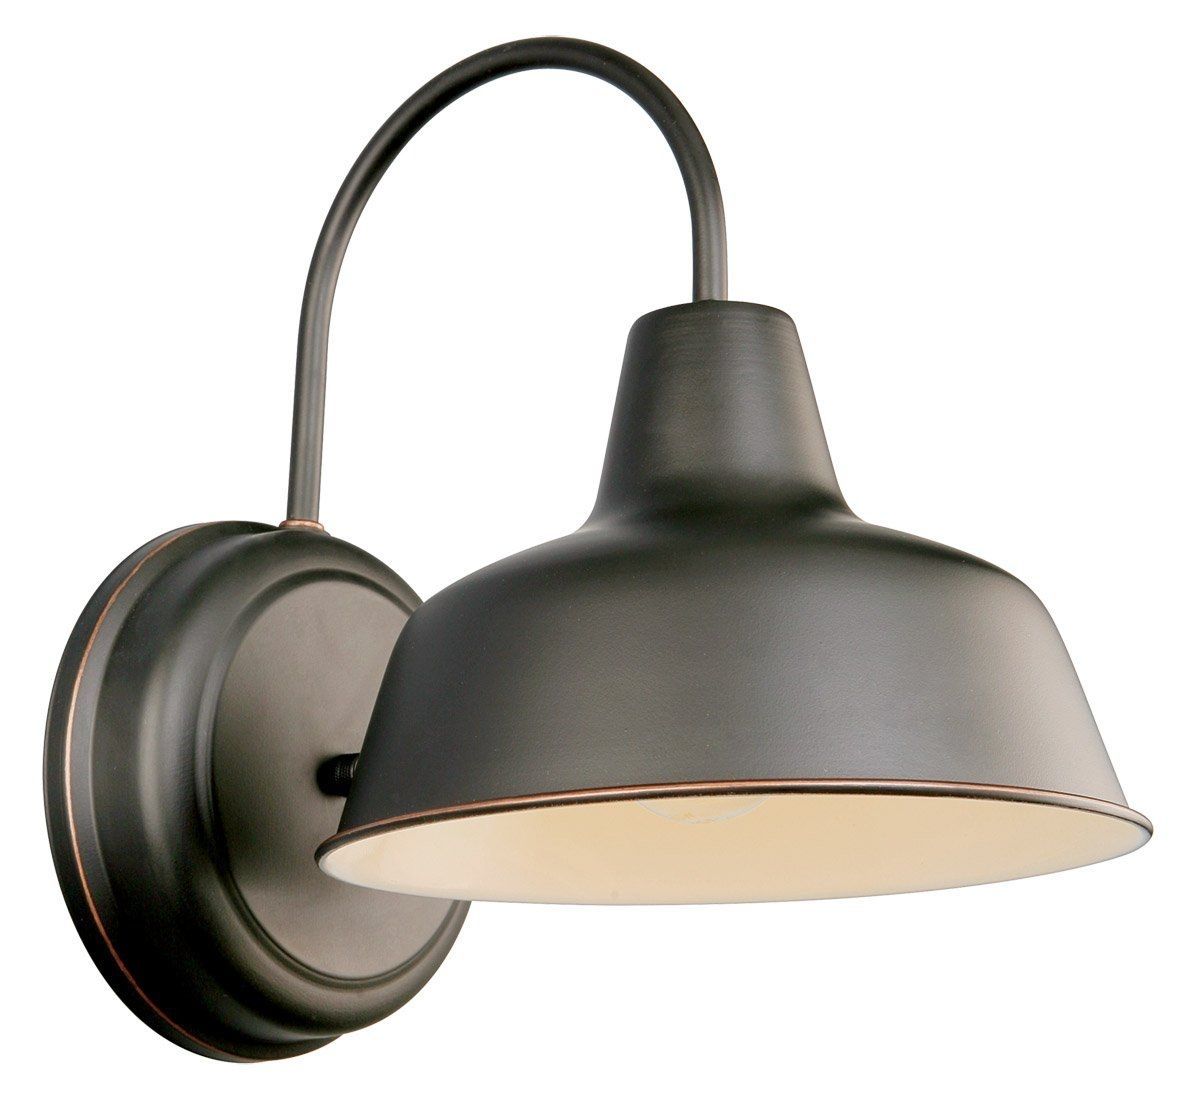 For Outsidegarage Amazon: Design House 519504 Mason Intended For Outdoor Wall Lighting At Wayfair (View 15 of 15)